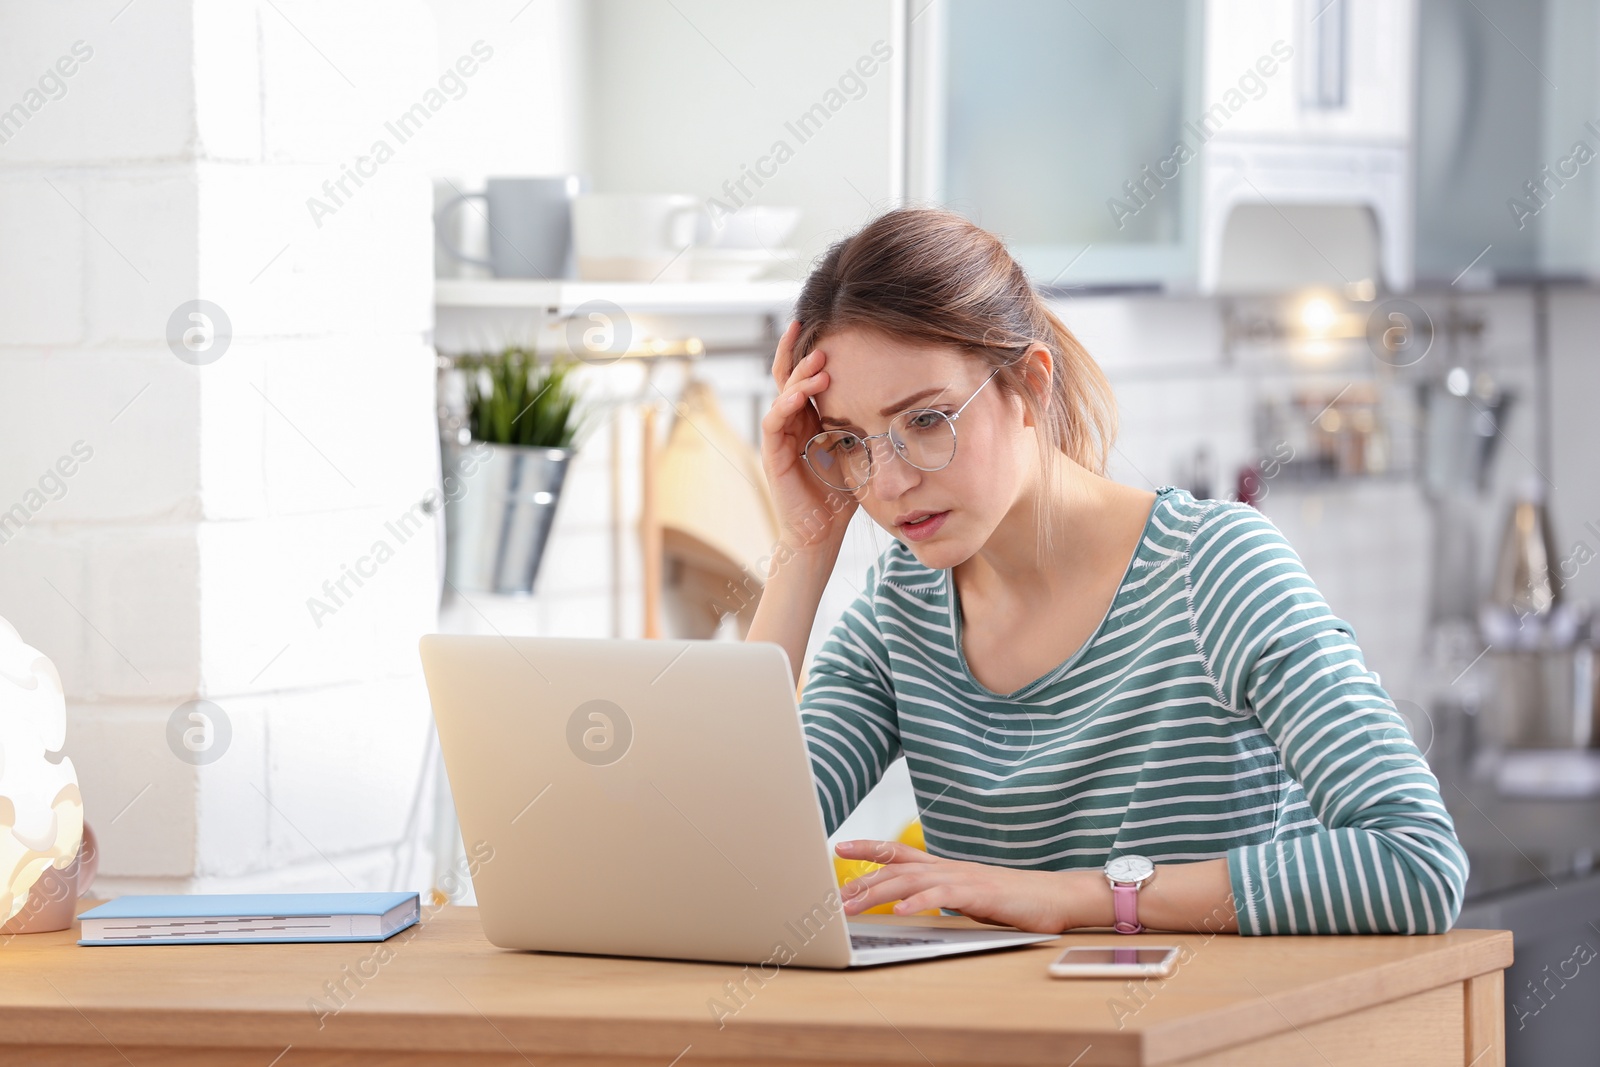 Image of Troubled young woman working on laptop at home